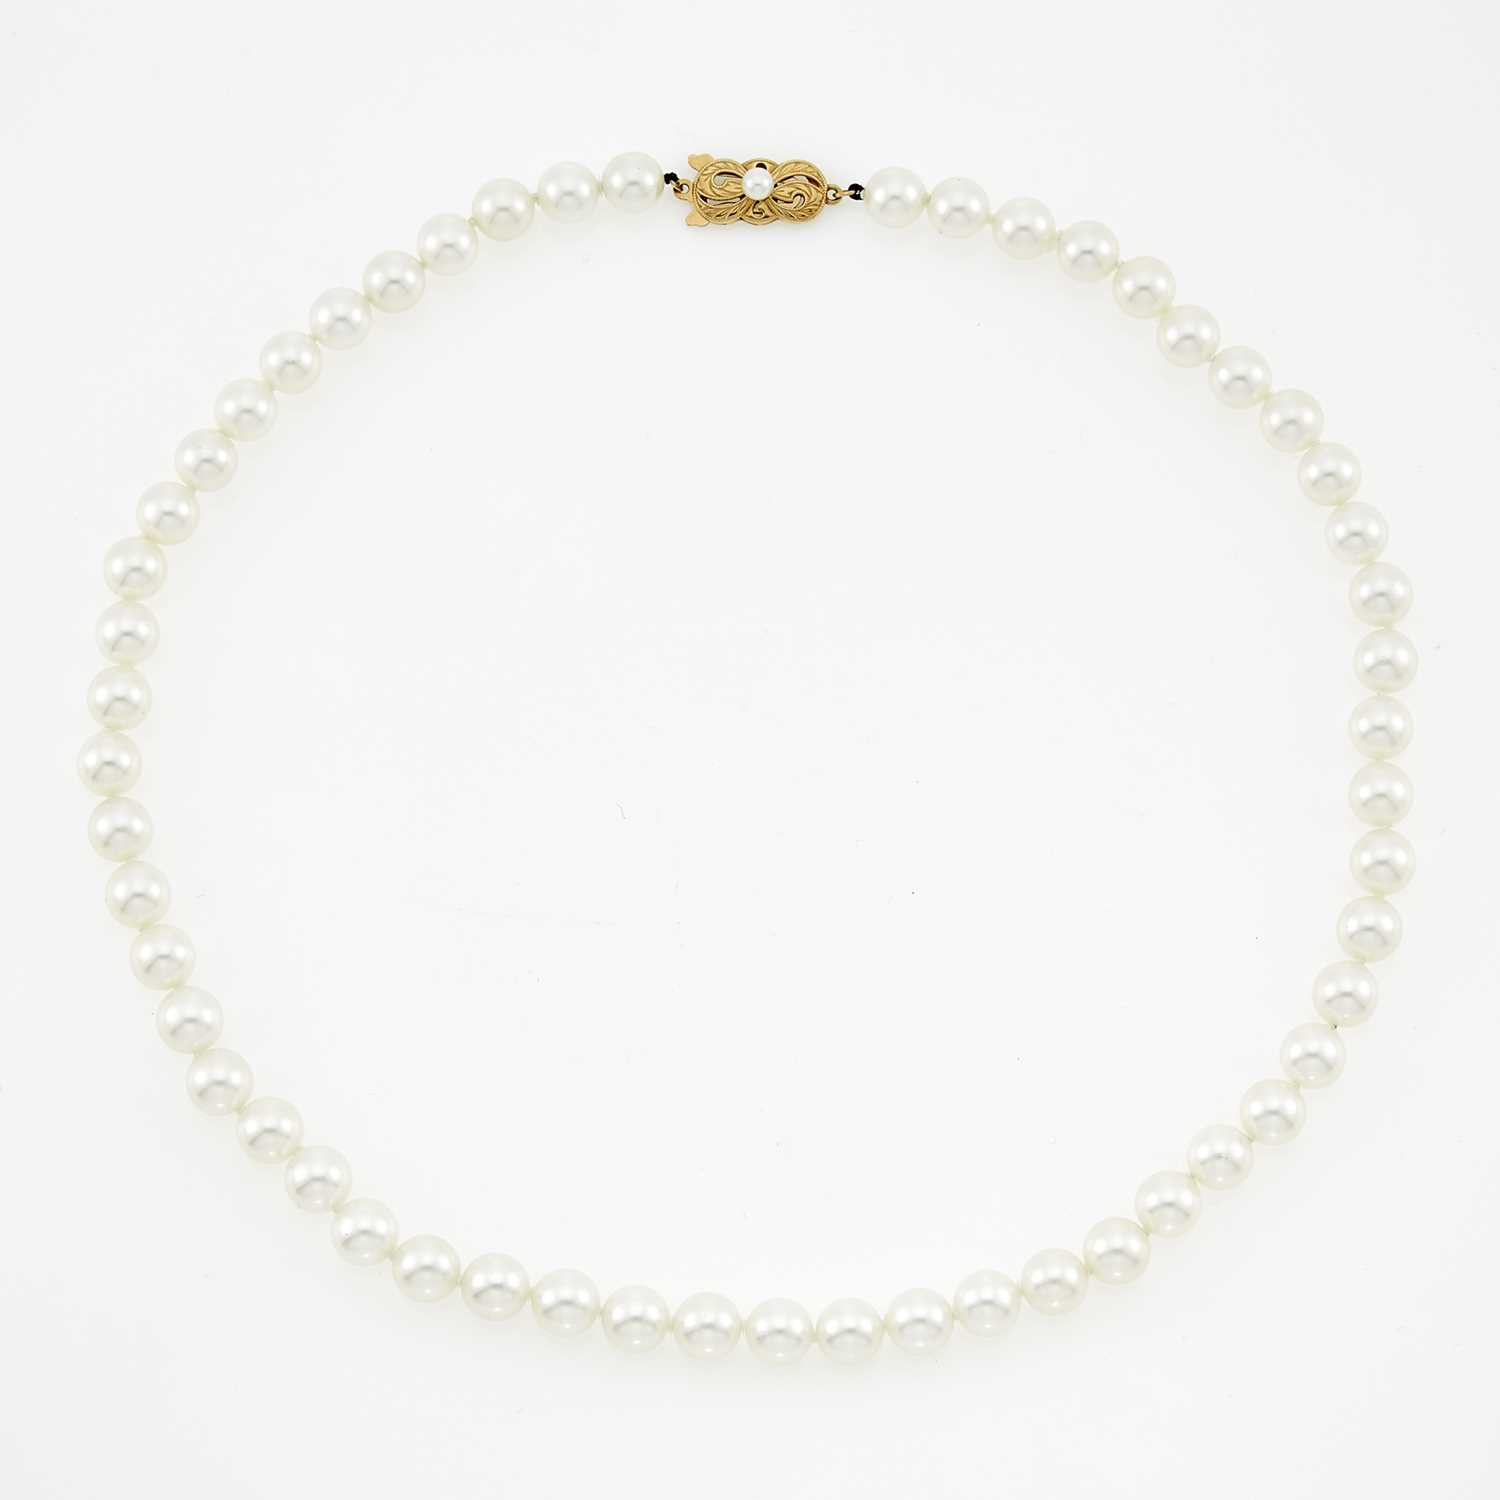 Lot 1166 - Mikimoto Cultured Pearl Necklace with Gold Clasp